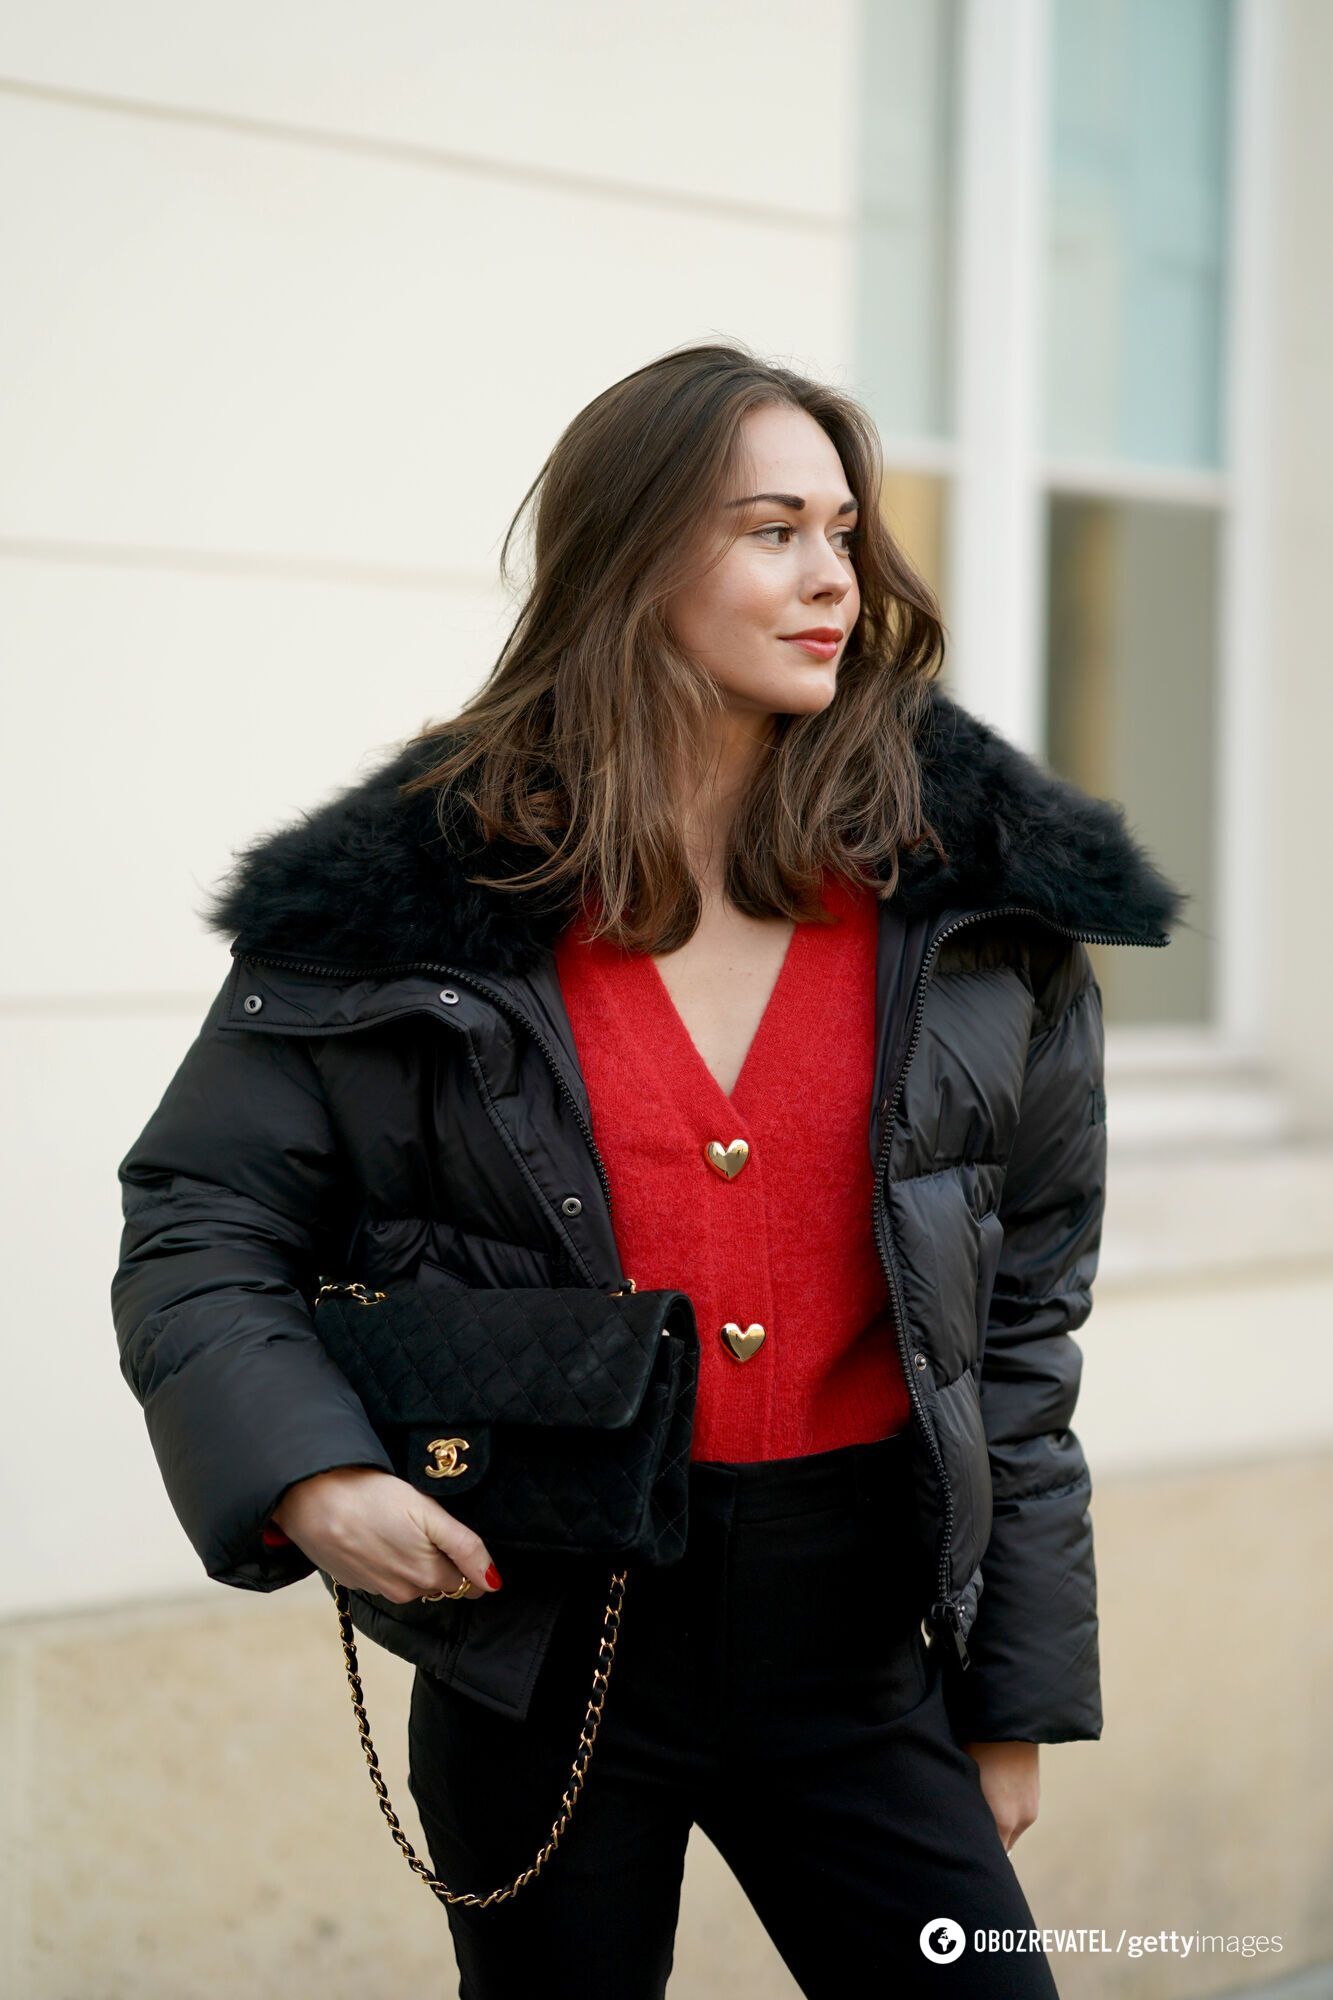 Fashion failure: 5 signs your down jacket is outdated (and what to replace it with)